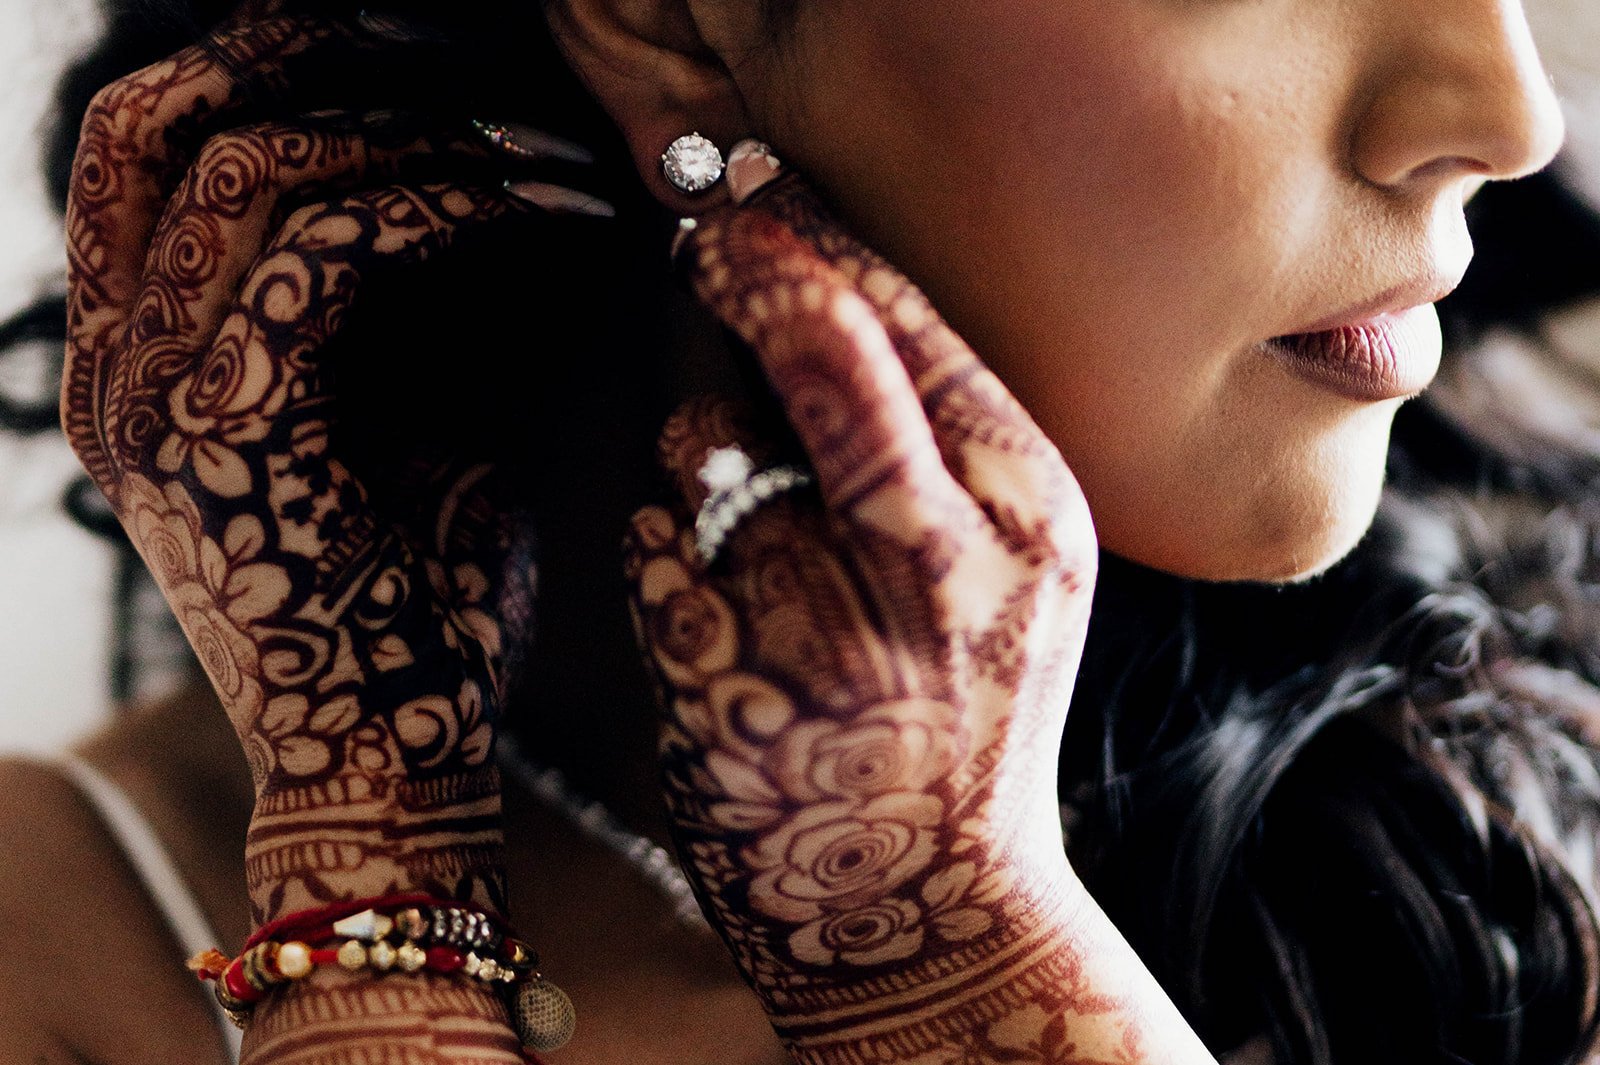 A close up of a brides henna covered hands as she puts in an earring.